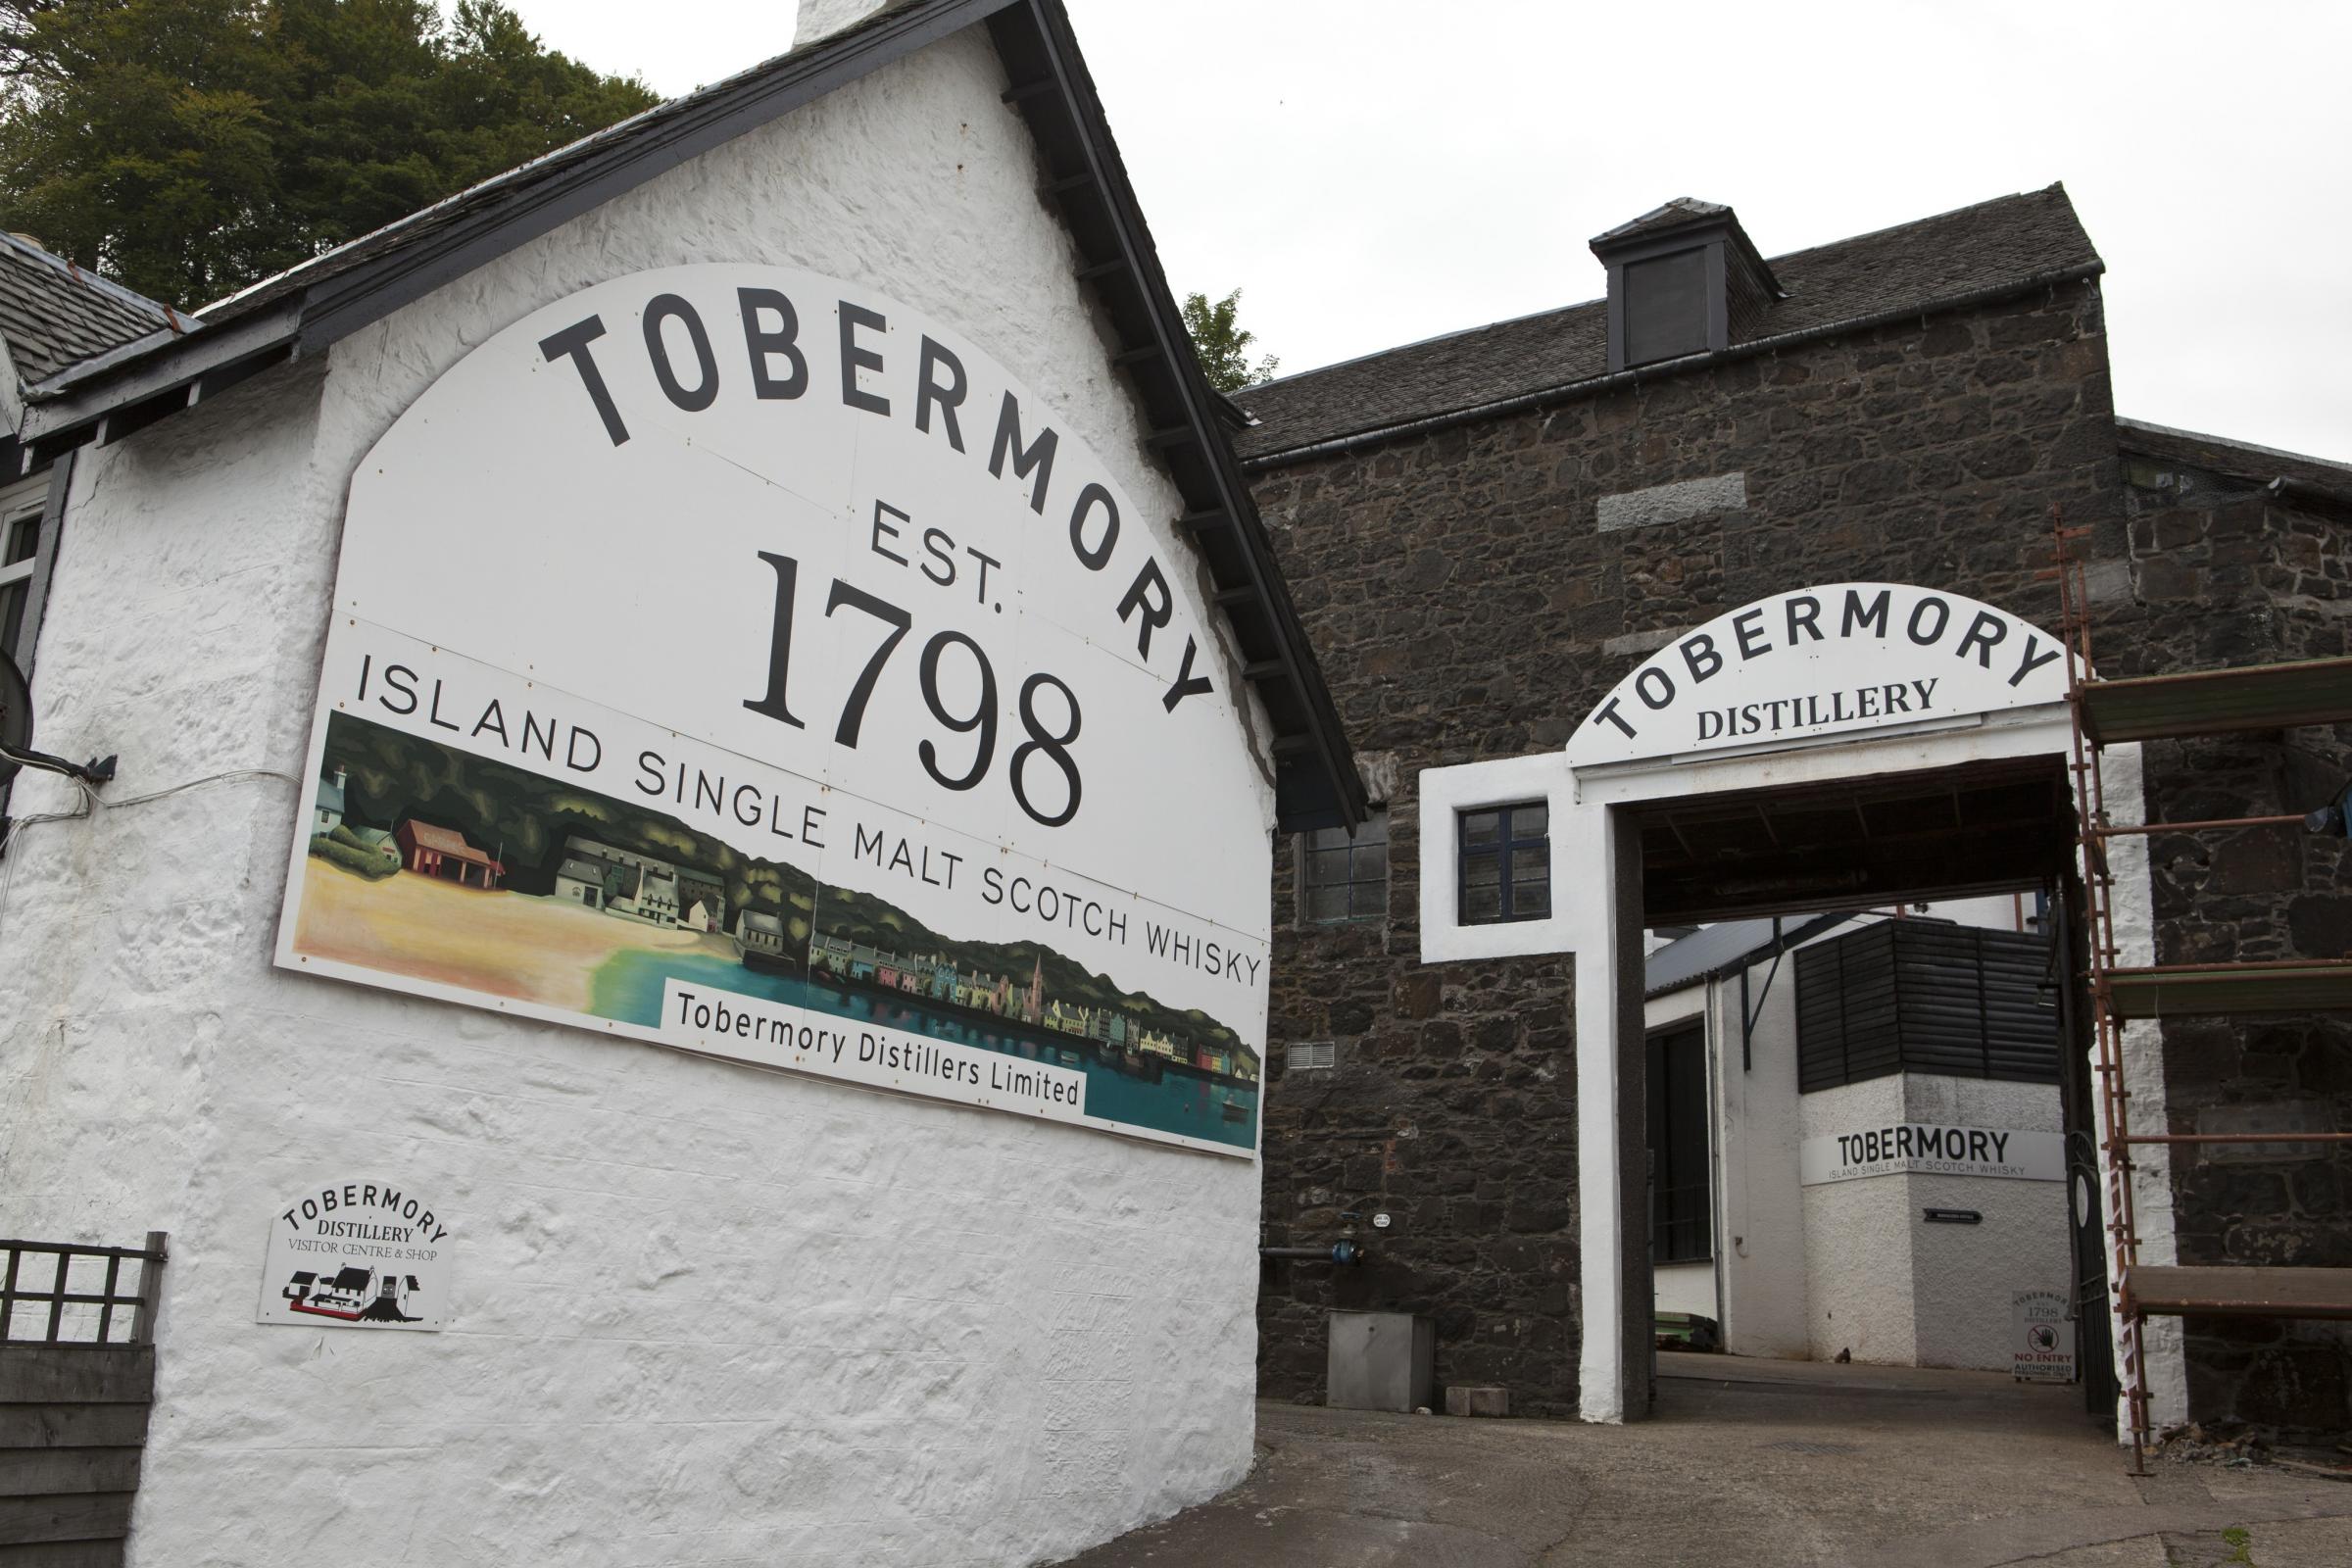 Deanston and Tobermoray distilleries are also in the Distell Group